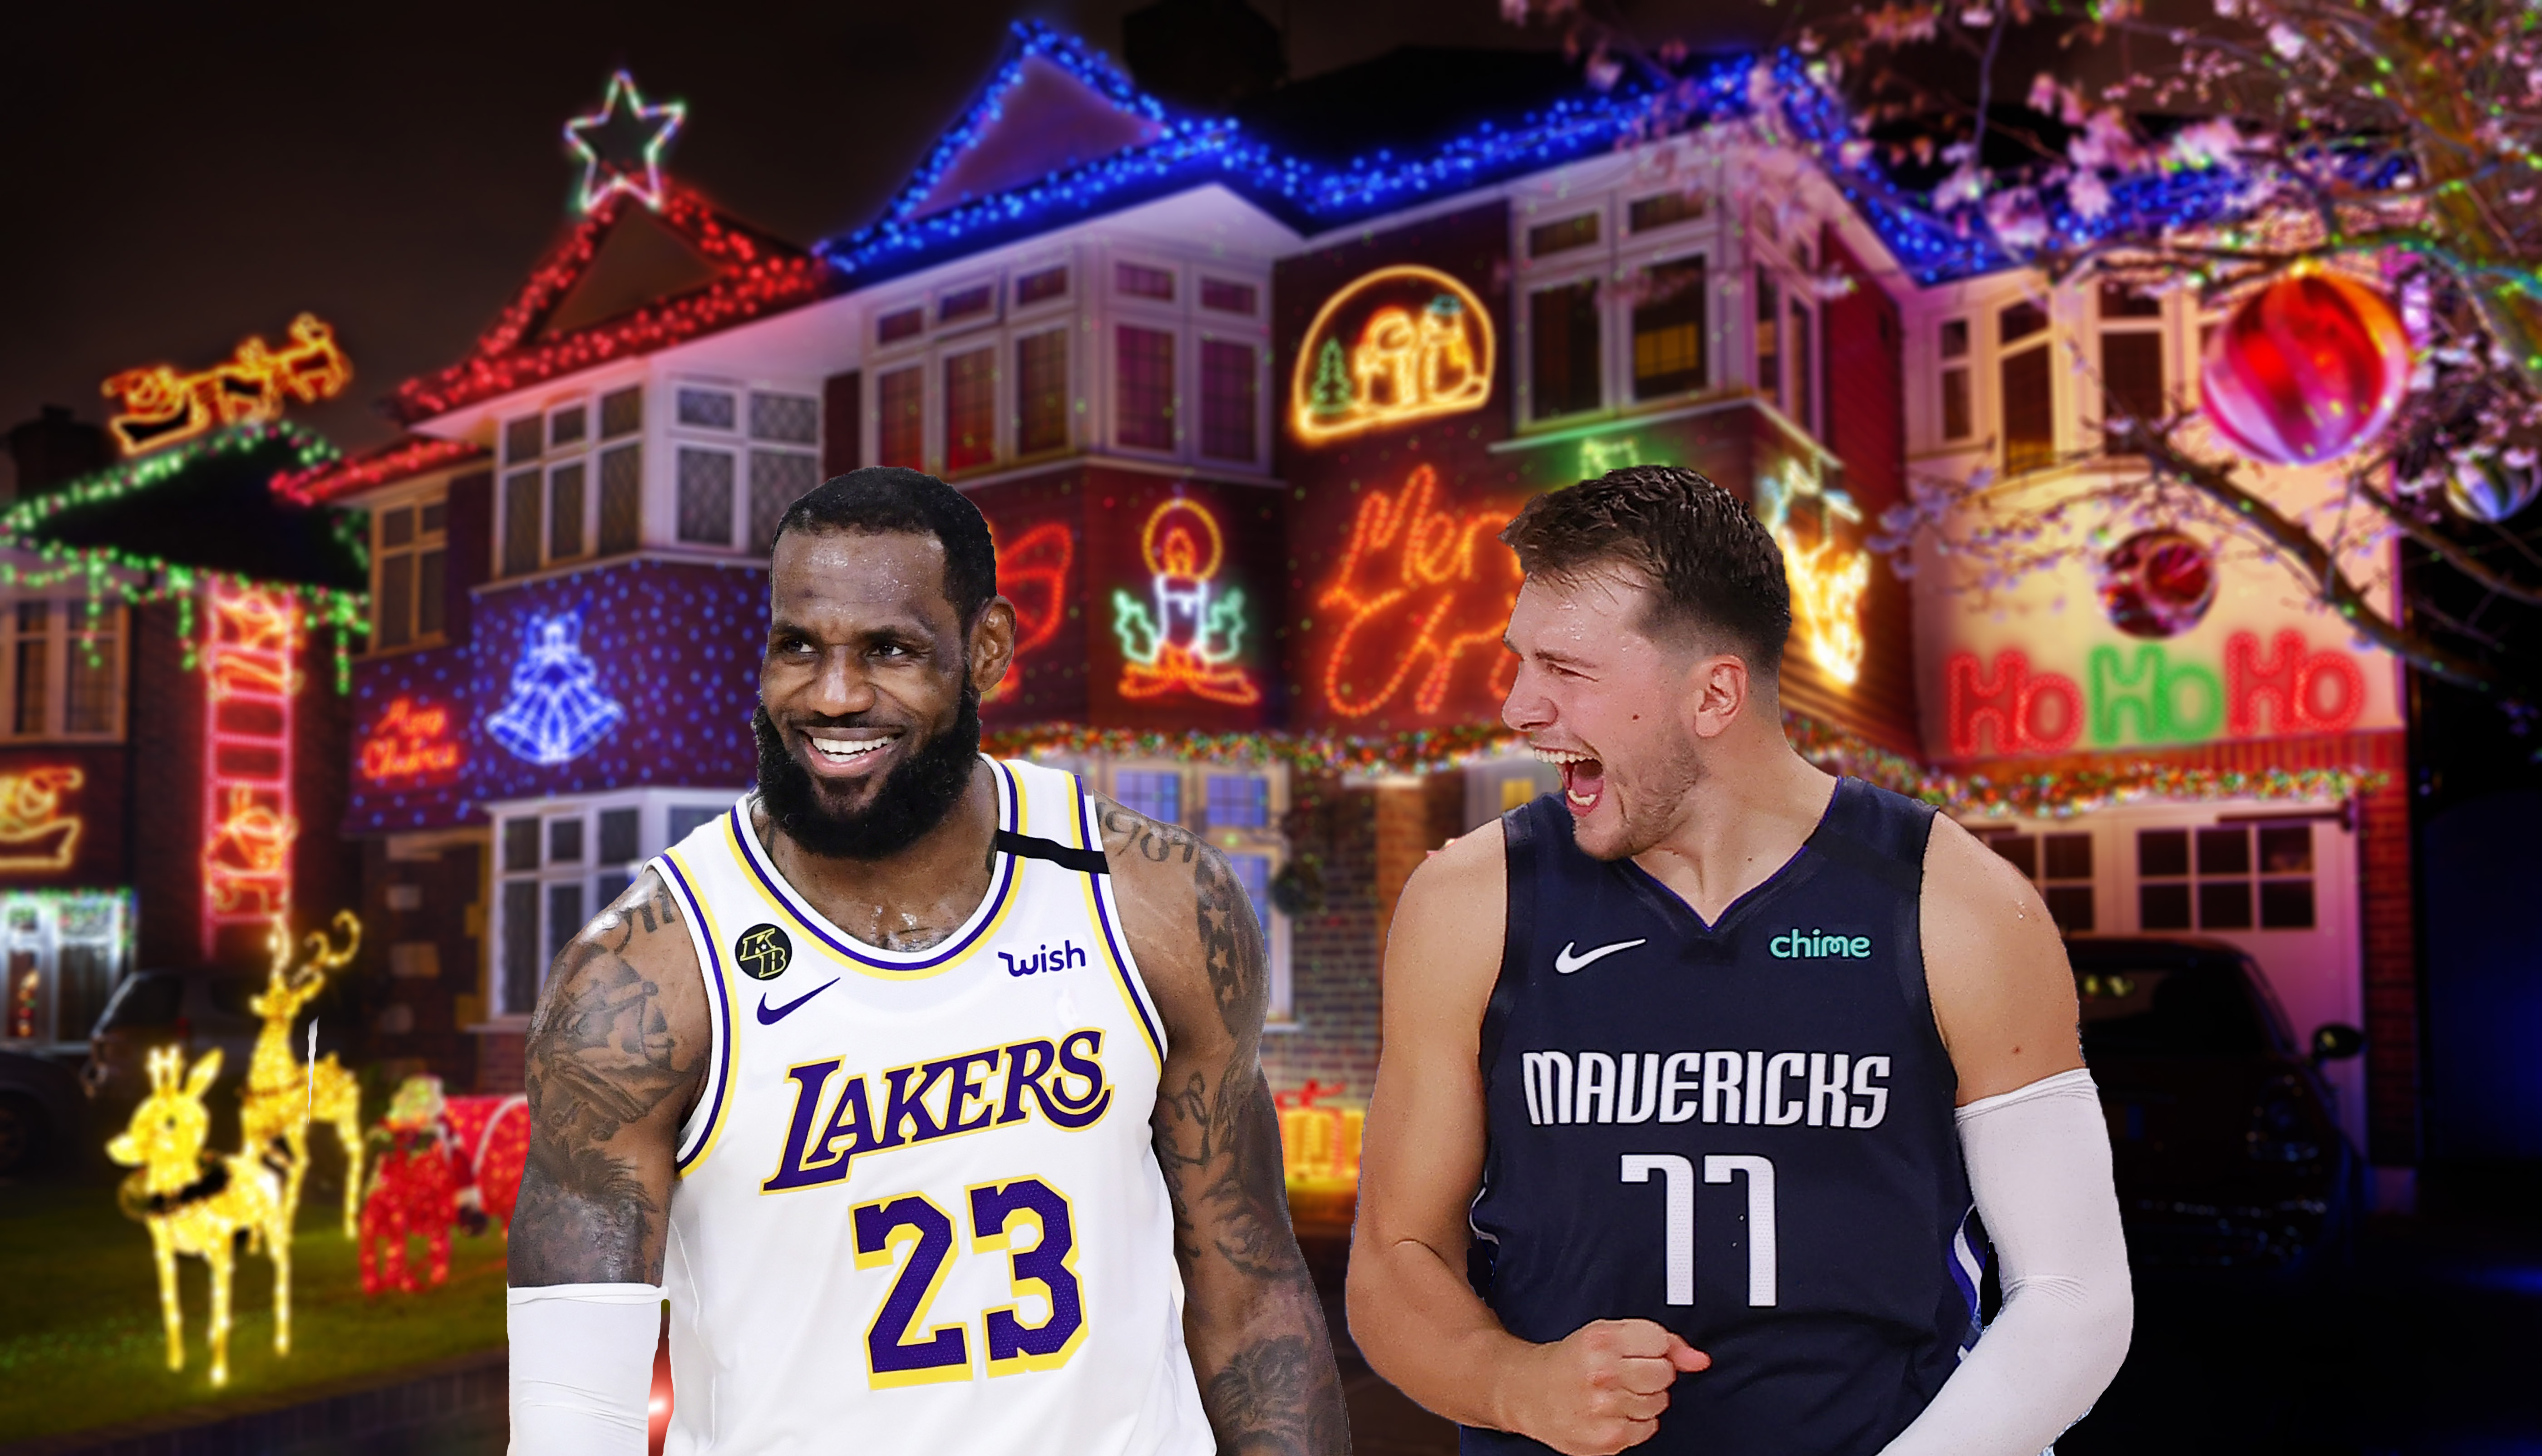 Nba Christmas Day Schedule 2022 The Nba's Christmas Day Schedule Looks More Lit Than Your Neighbor's  Holiday Decorations | This Is The Loop | Golfdigest.com